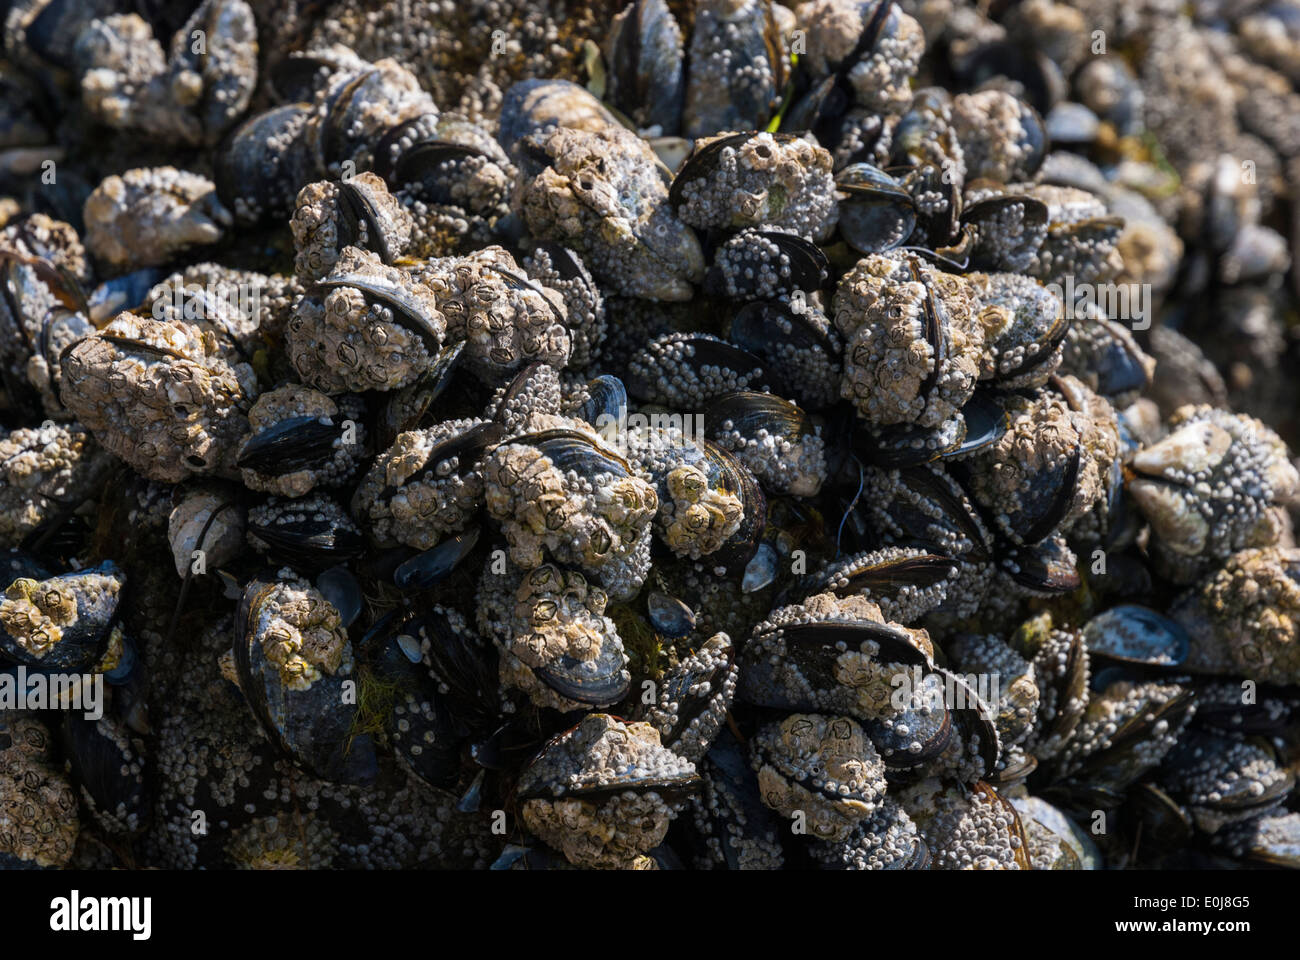 Mussels and Barnacles fighting for space Stock Photo